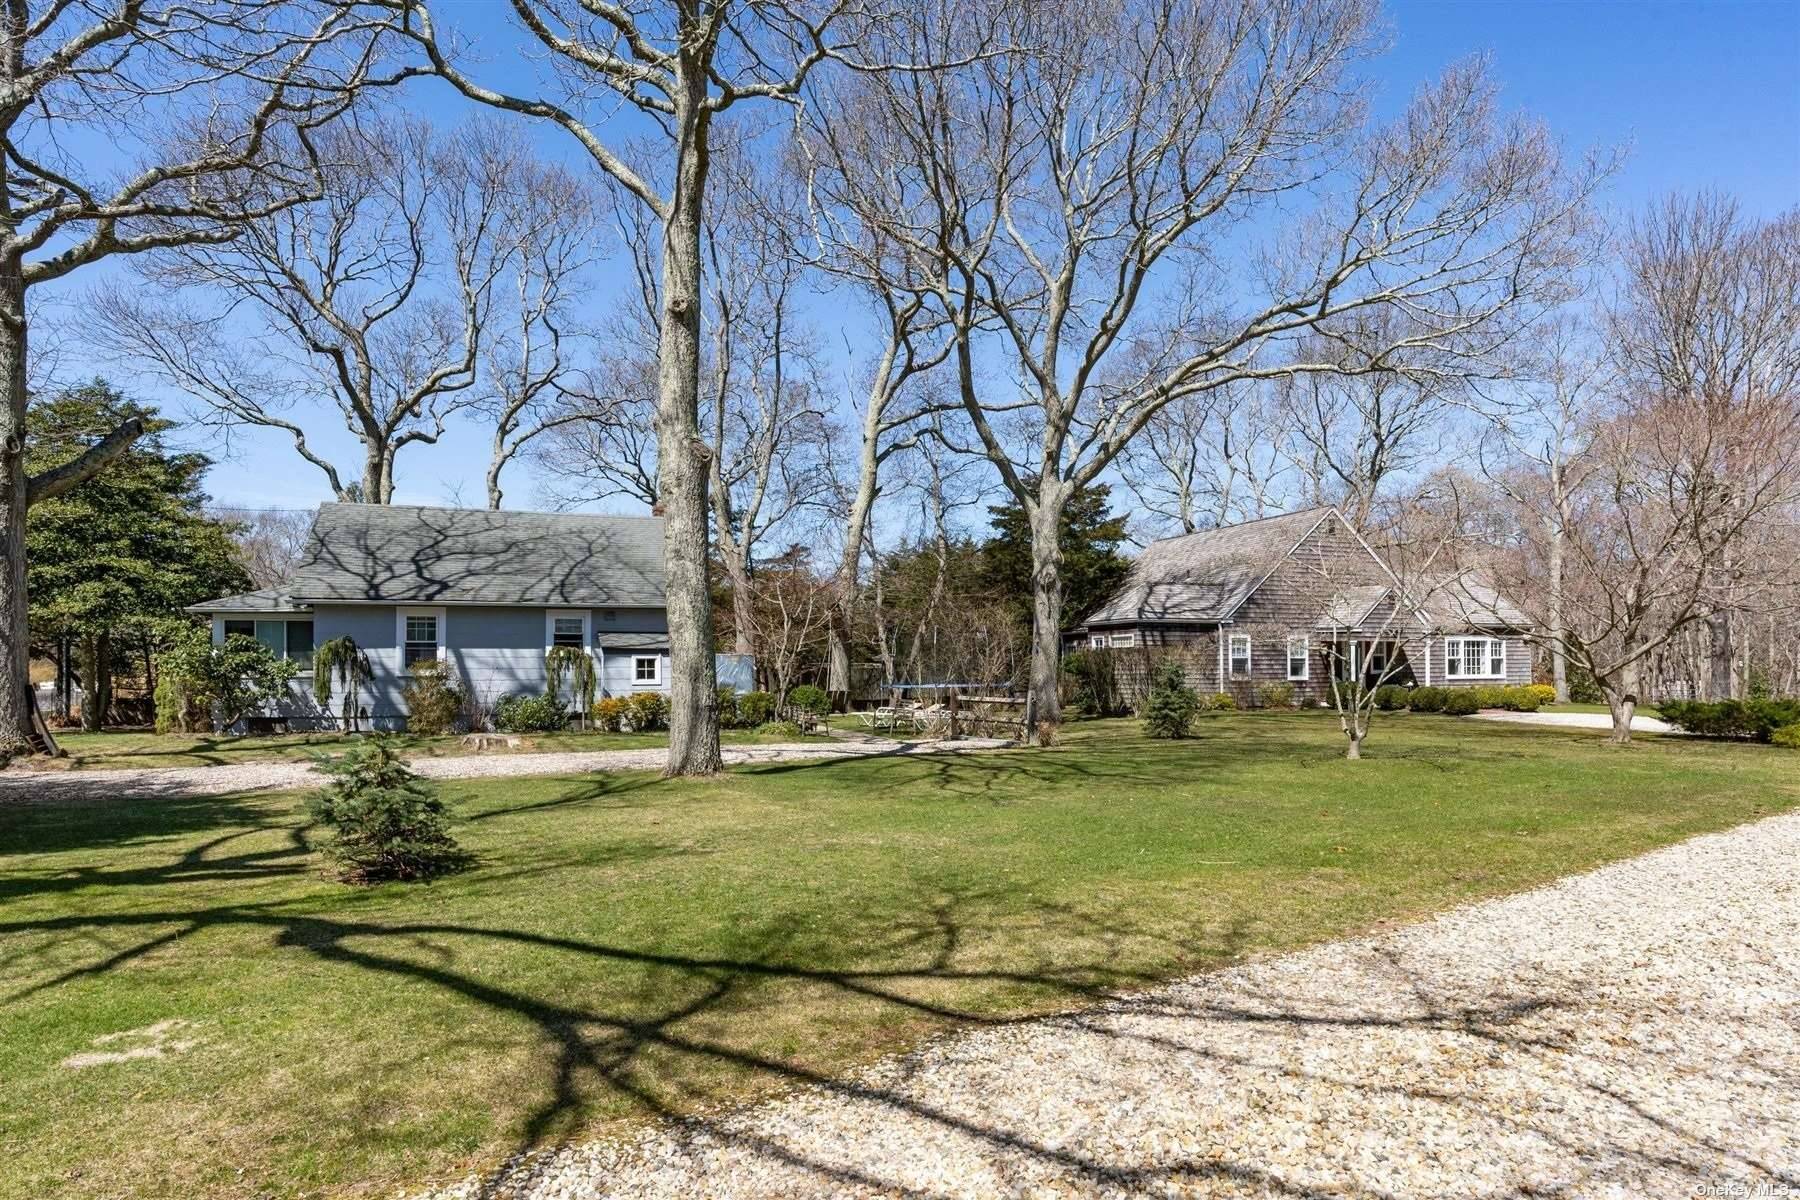 East Hampton Compound The property consists of two legal residences erected before zoning.